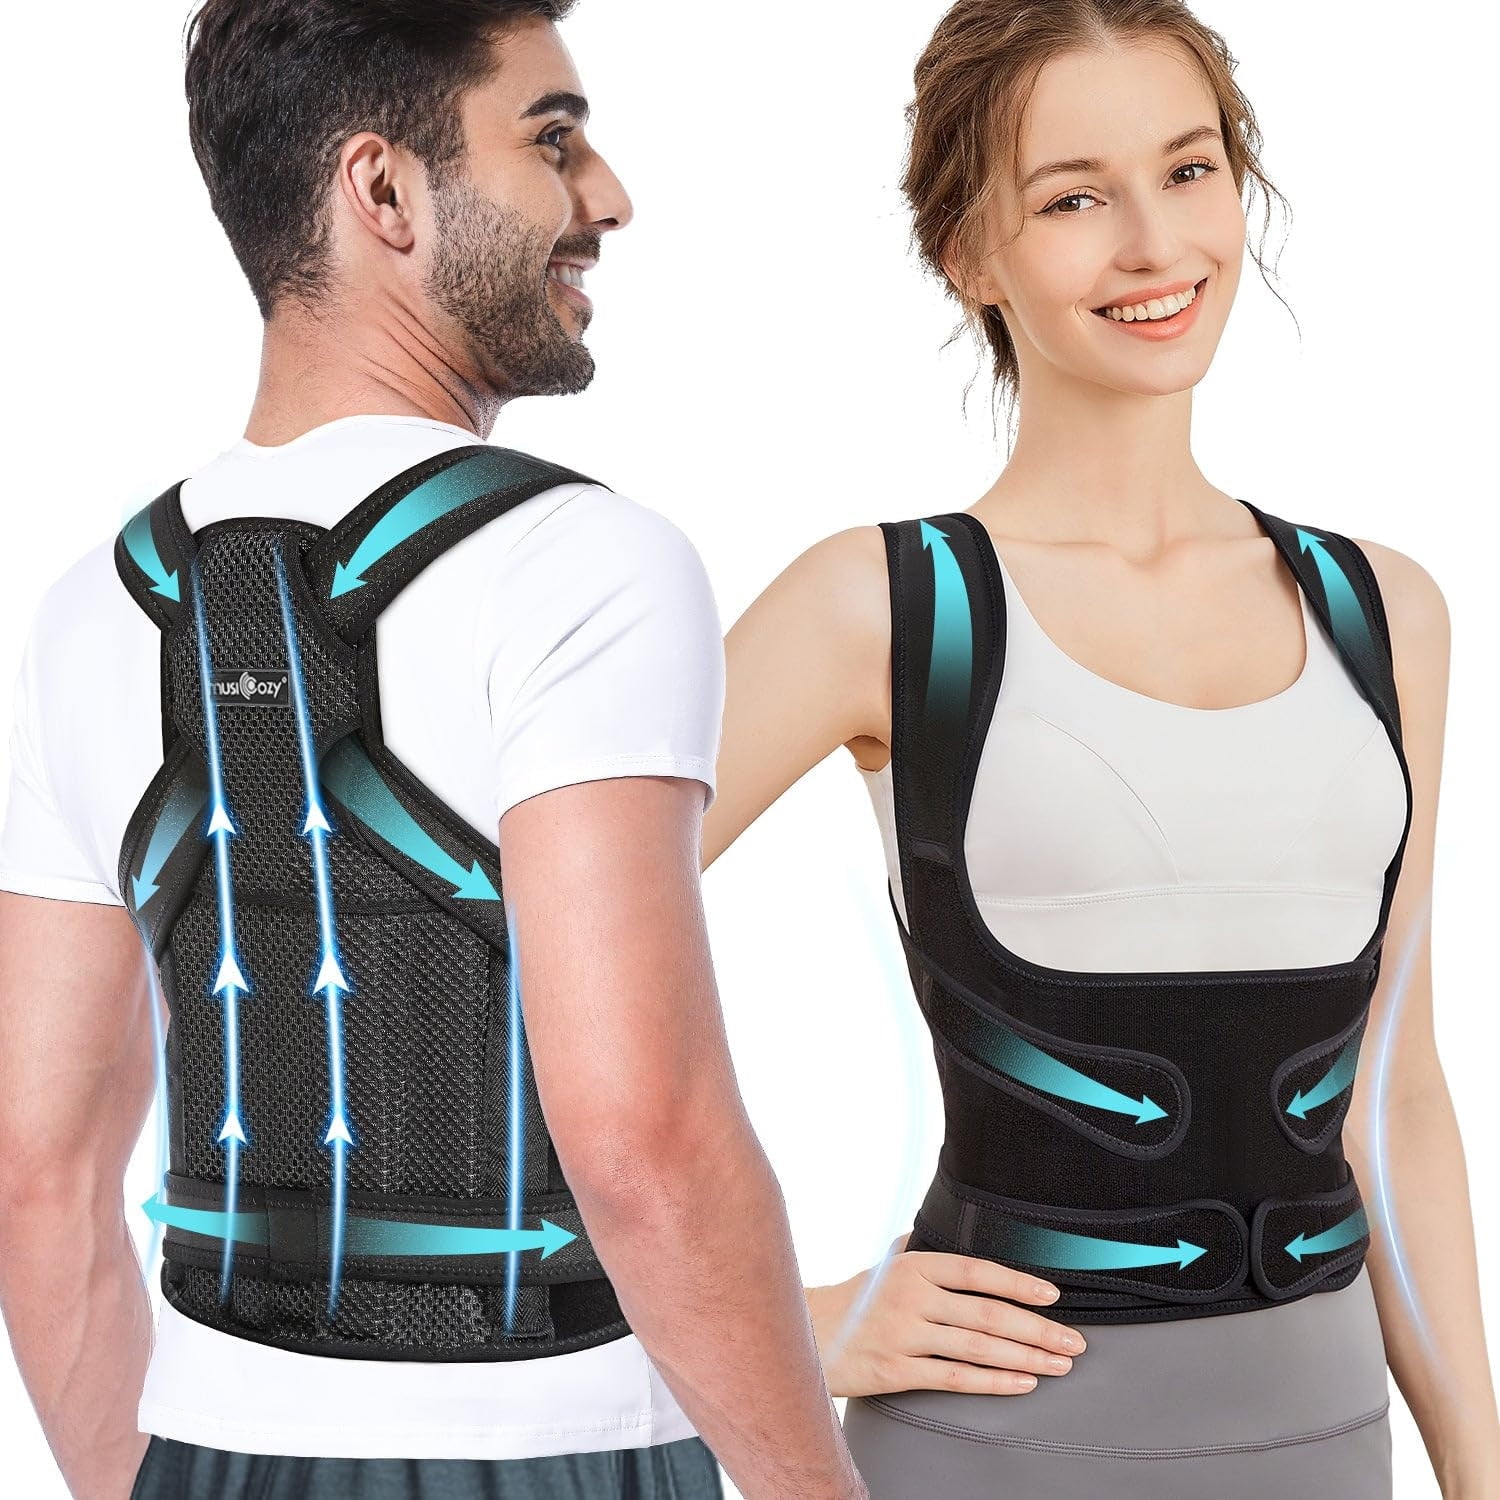 Mercase Posture Corrector for Men and Women, Posture Brace for  Back,Shoulders,Hunchback Scoliosis Correction, Adjustable and Comfortable,  Large(32-39 inches) 